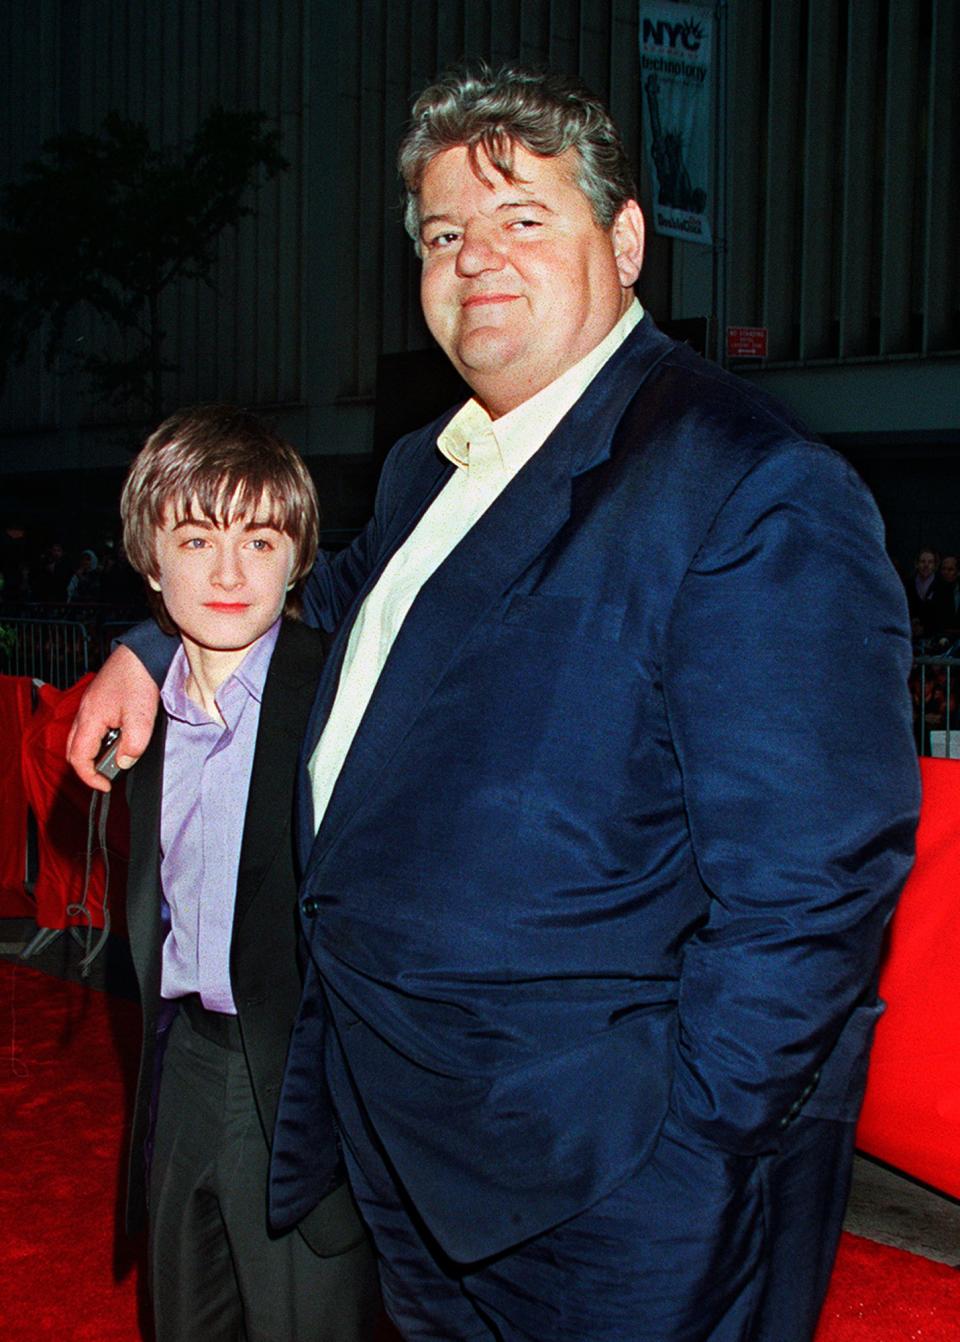 Daniel Radcliffe, left, who played Harry Potter, and Robbie Coltrane, who played Hagrid, arrive for the film's New York premiere on Nov. 11, 2001.